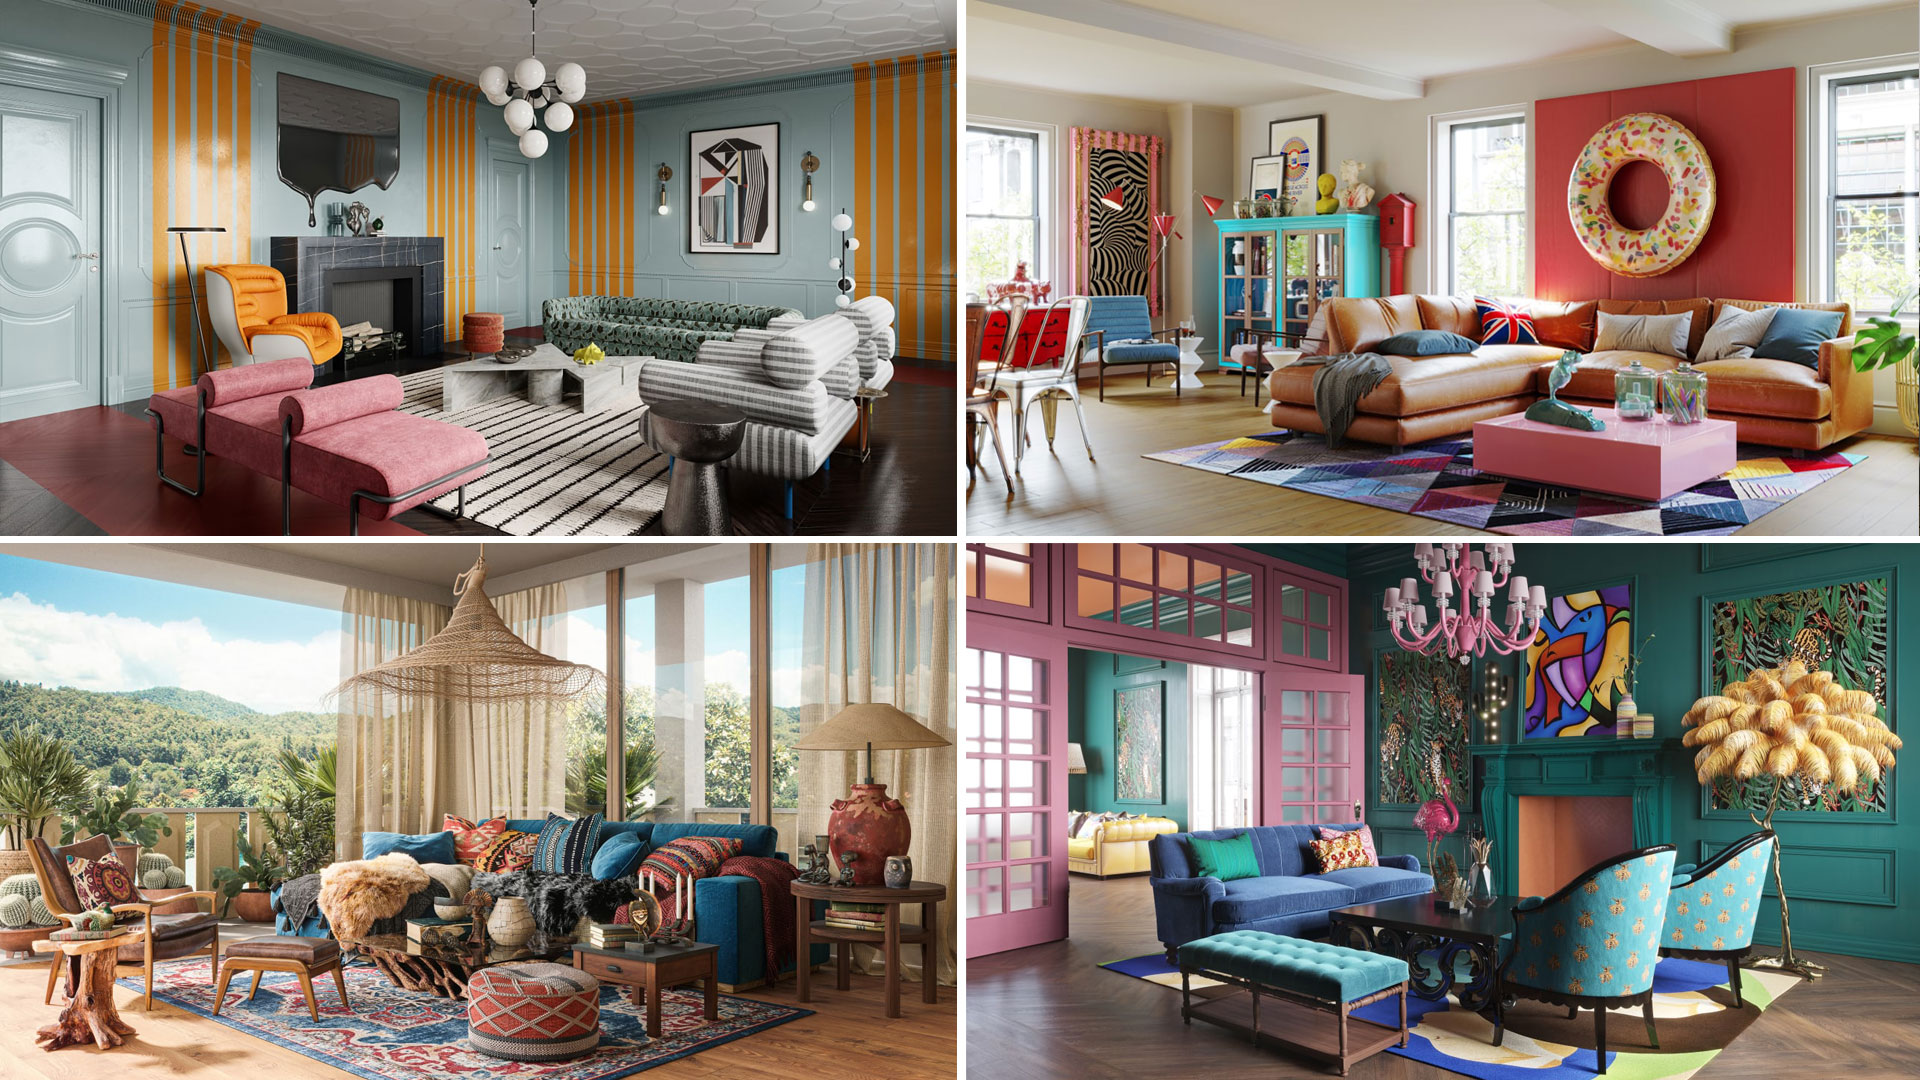 A Collage of Four Eclectic Interiors Design Styles